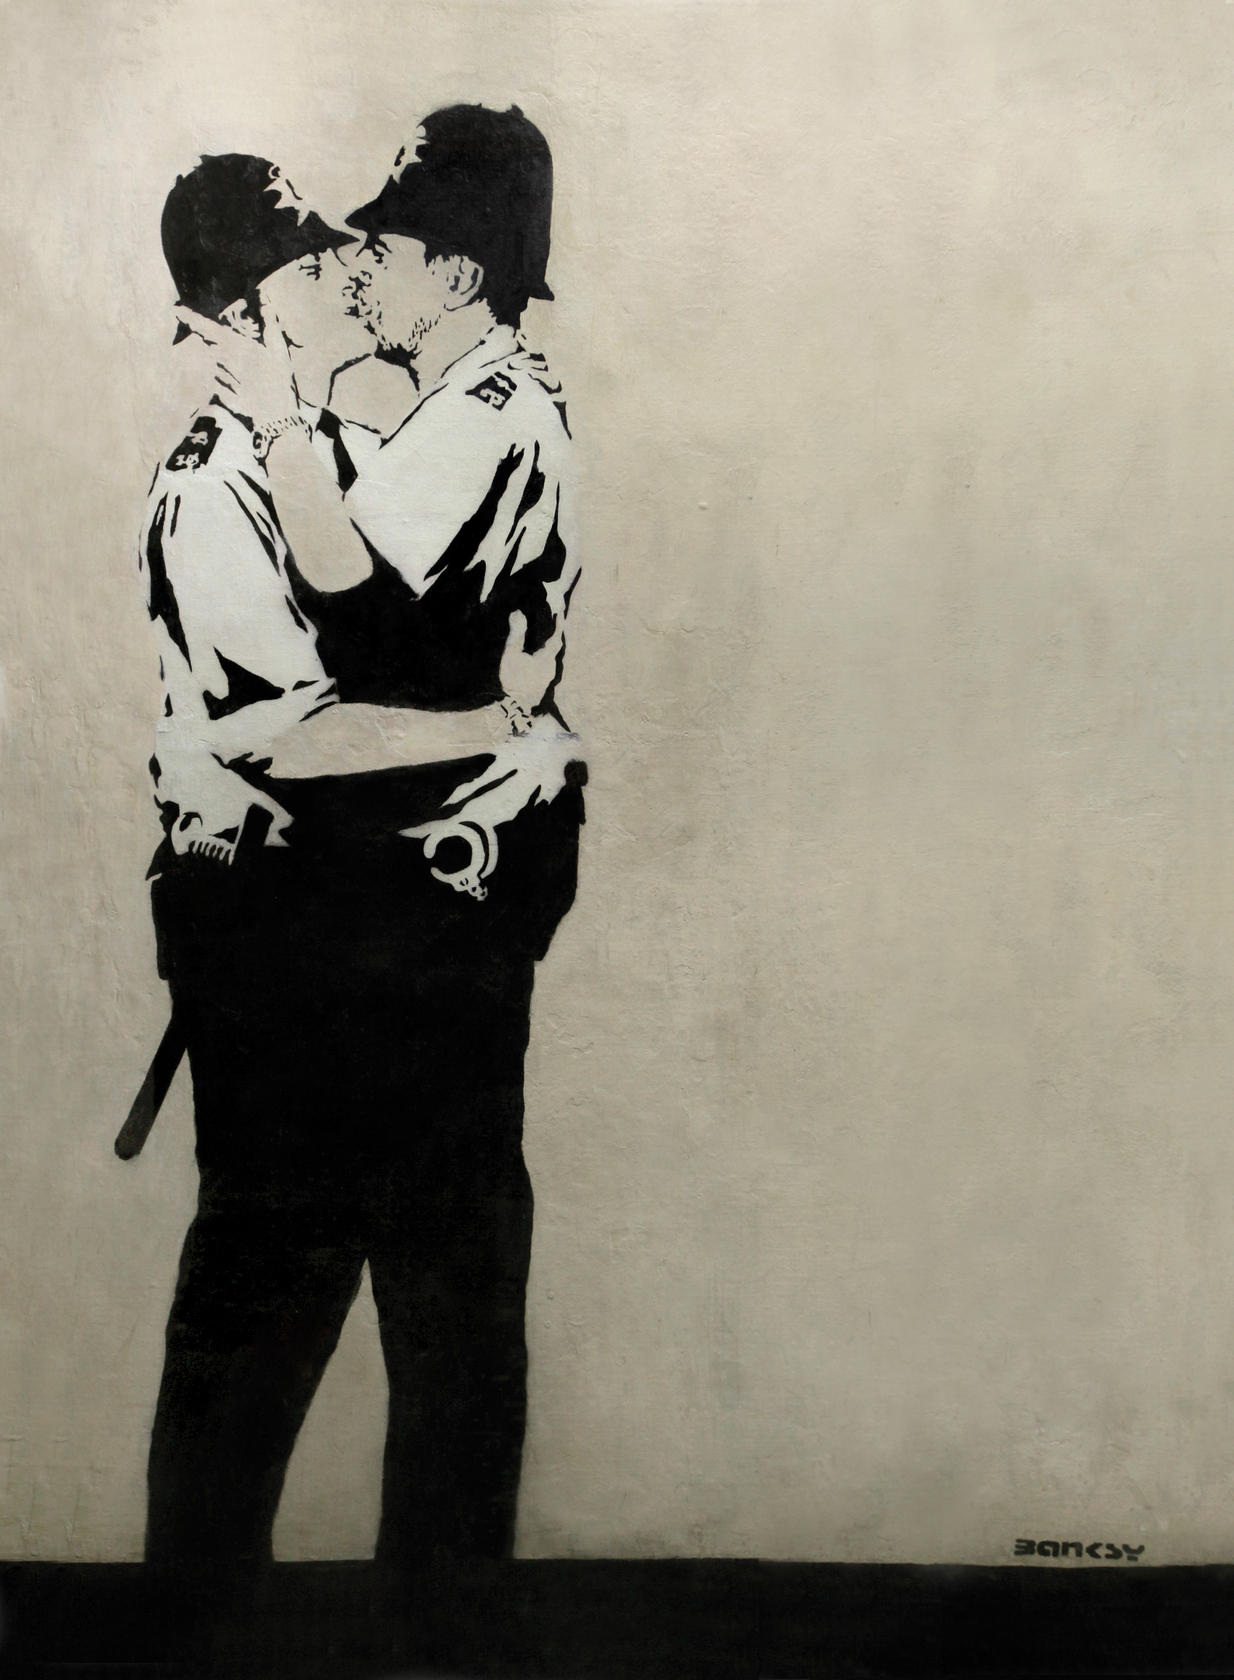 Banksy 'Kissing Coppers' mural auctioned for US$575